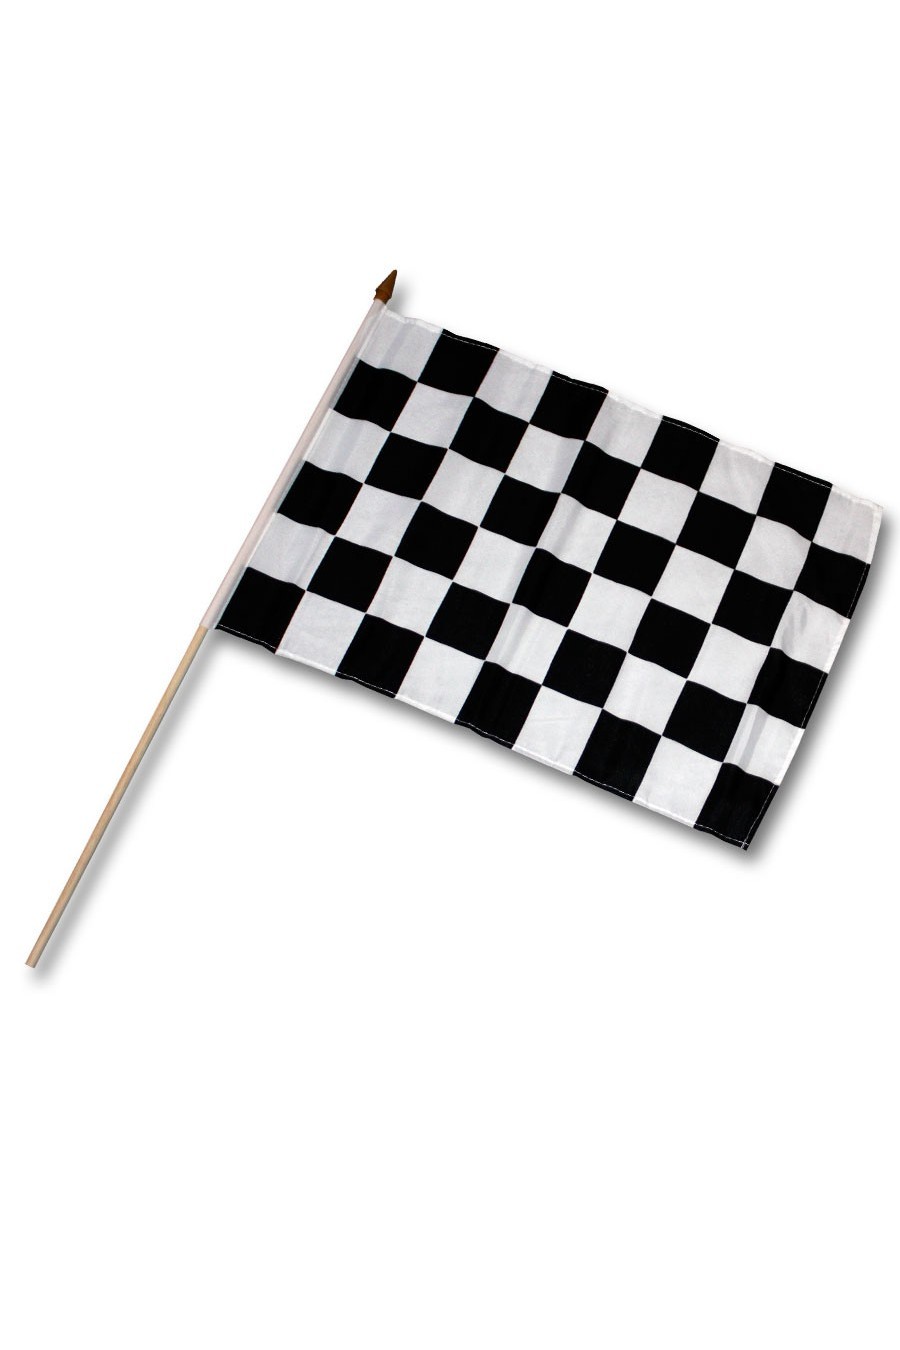 Buy Checkered Flag F1 & MotoGP 20.5x13.5cm.. Available in black